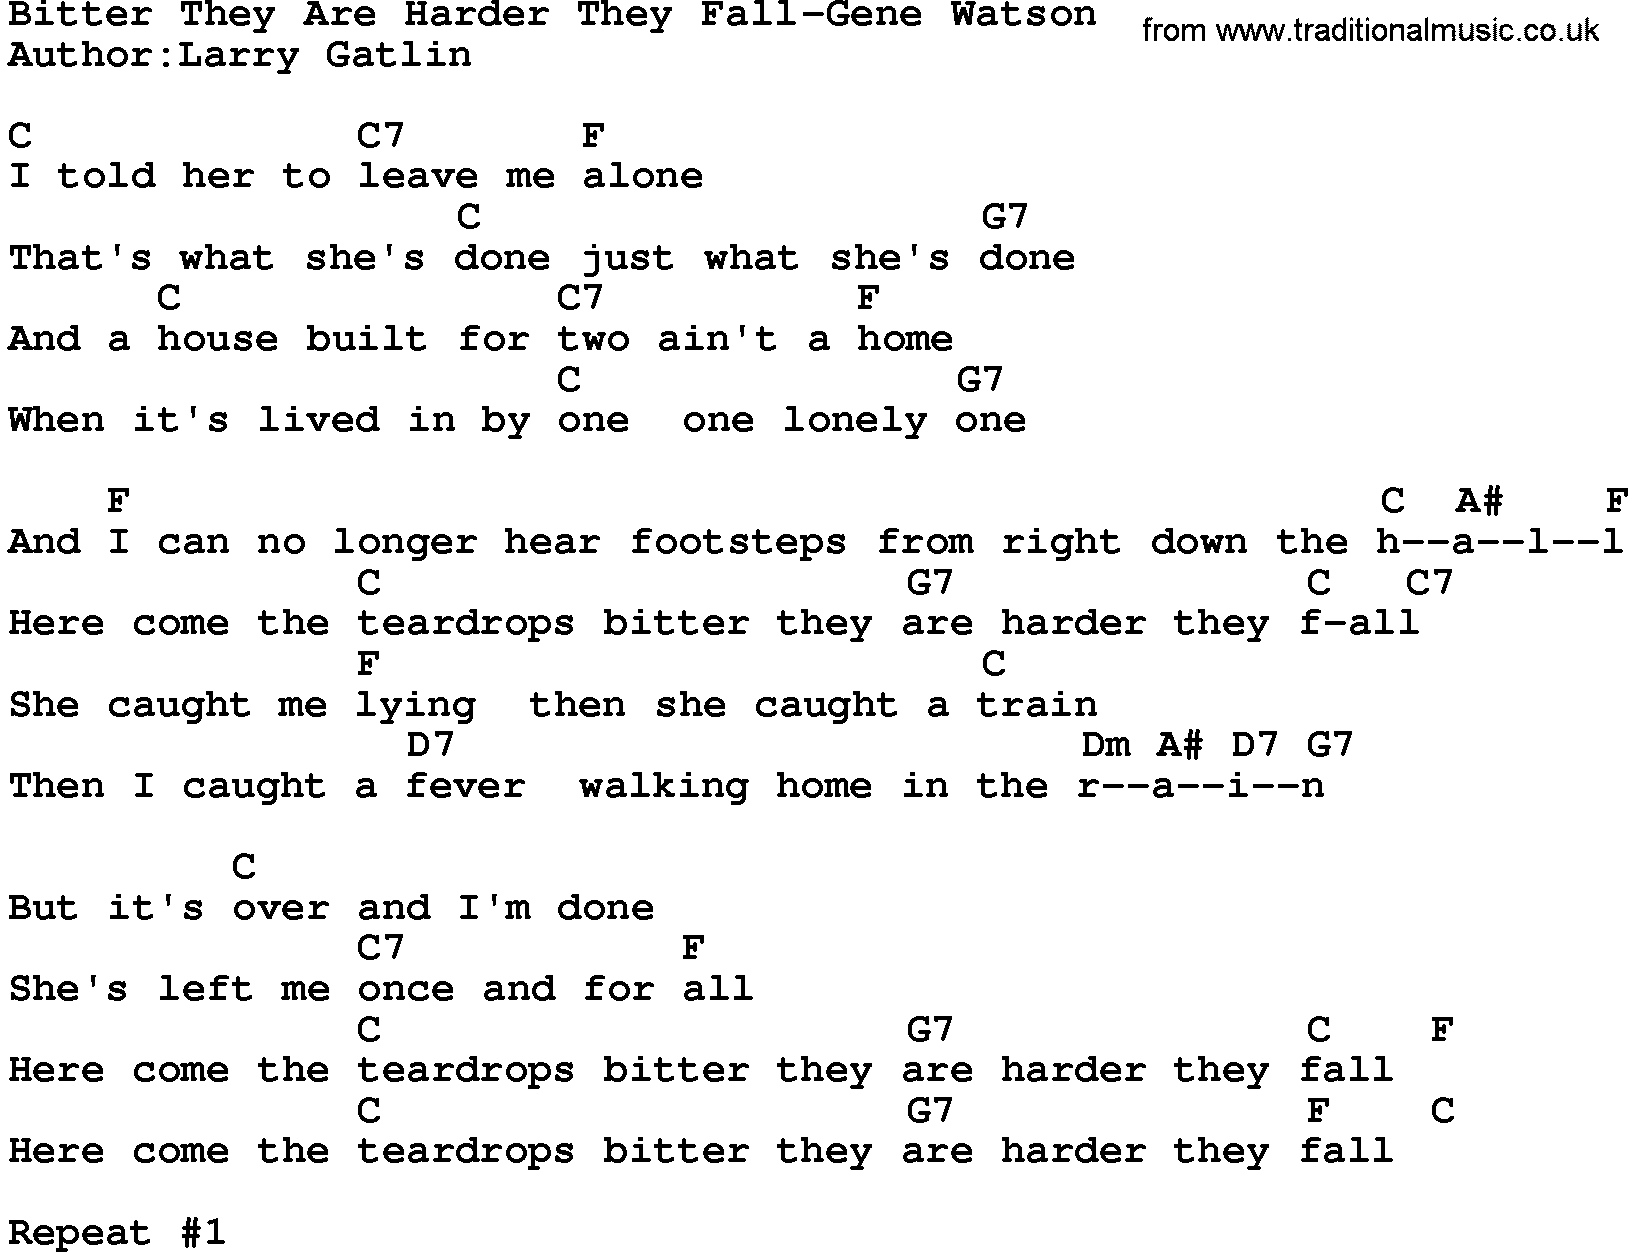 Country music song: Bitter They Are Harder They Fall-Gene Watson lyrics and chords